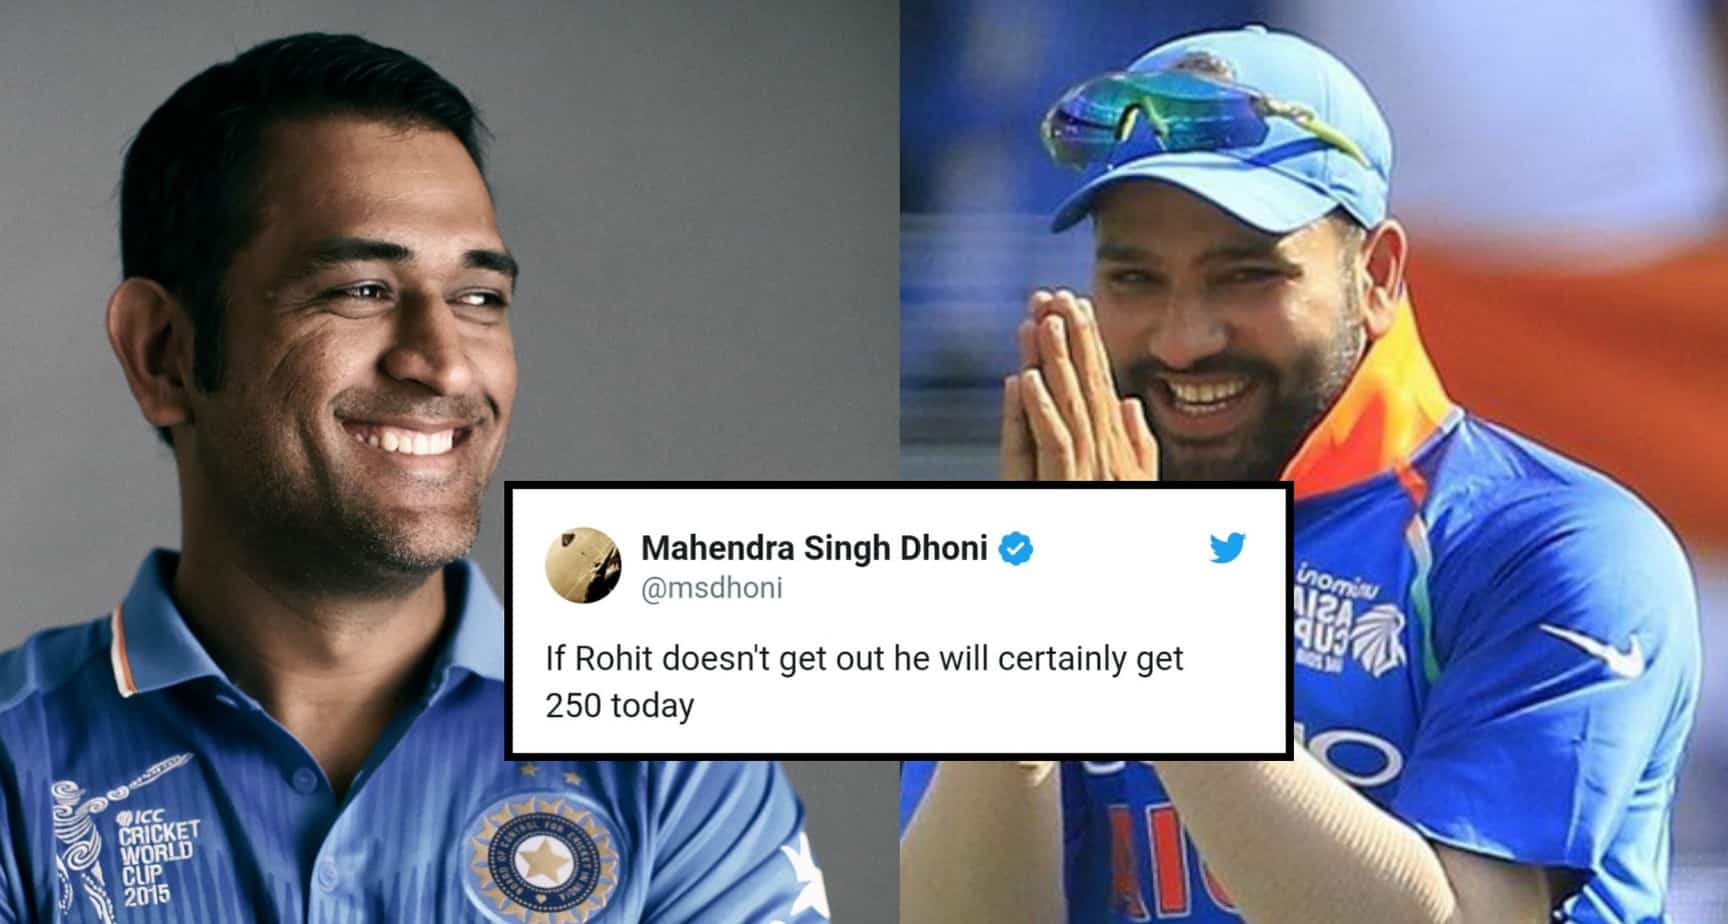 Top 7 most cheeky tweets from MS Dhoni you shouldn't miss